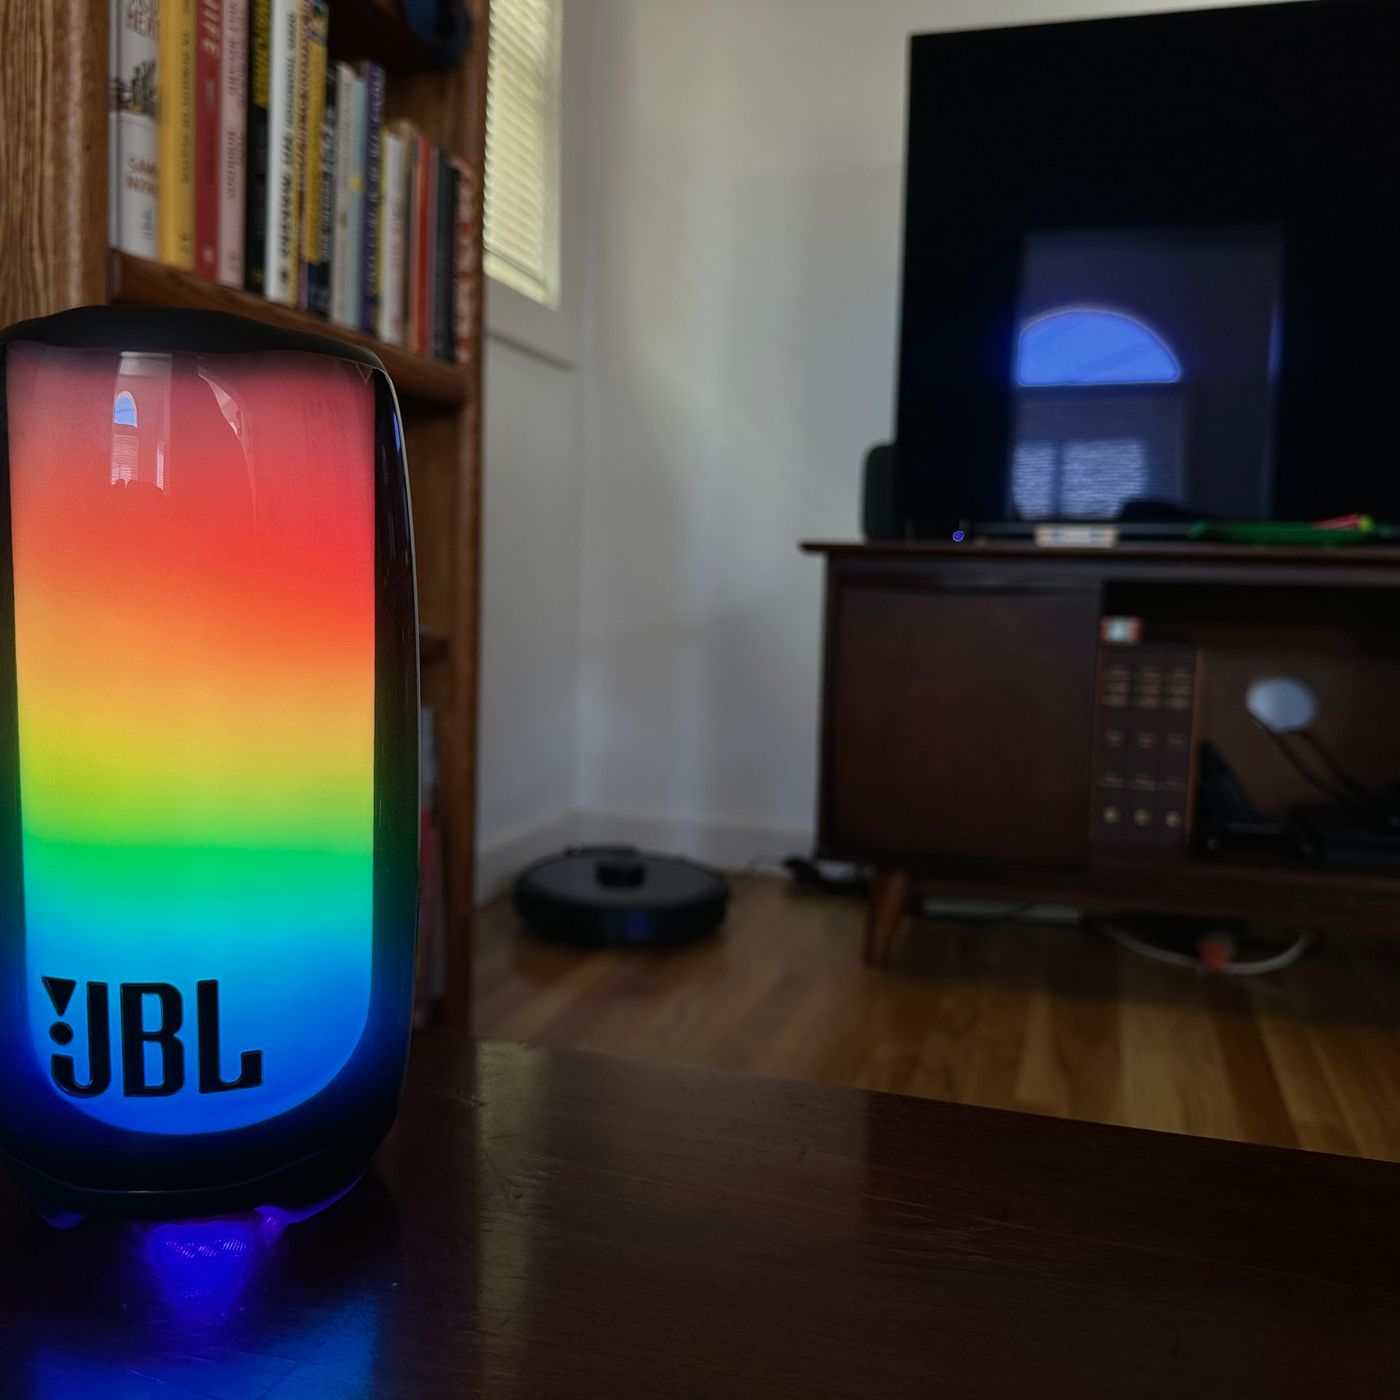 JBL Pulse portable Bluetooth speaker review: The mobile speaker with a  built-in light show - CNET